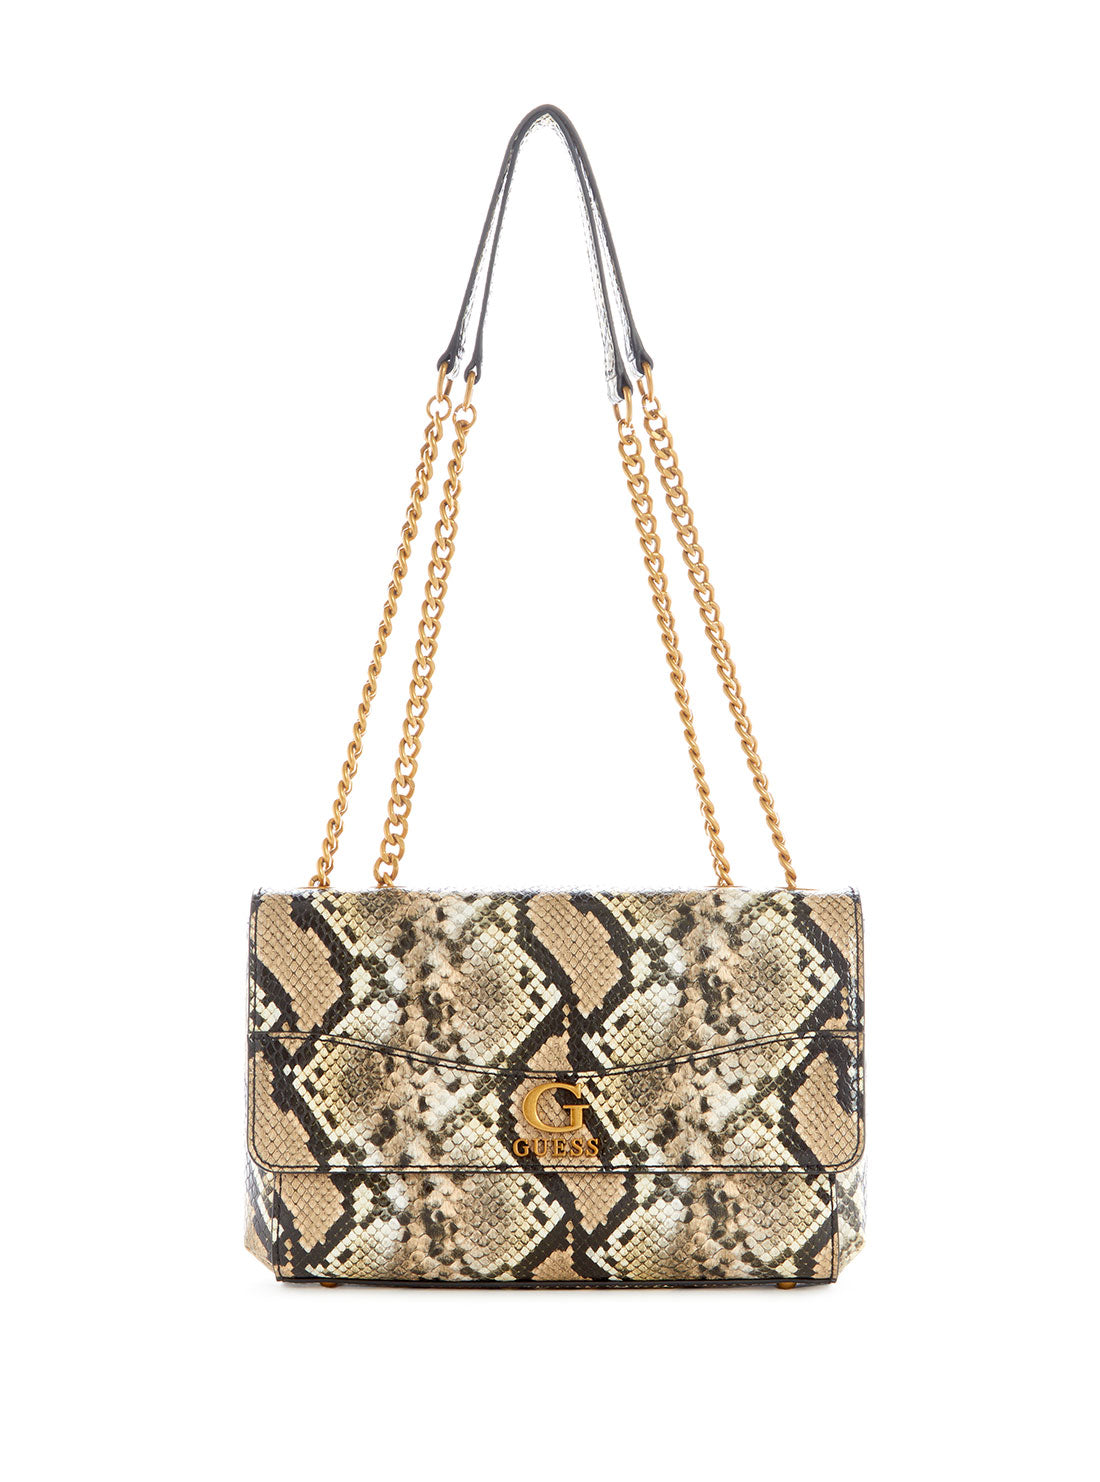 GUESS Women's Natural Python Nell Crossbody Bag KB867821 Front View